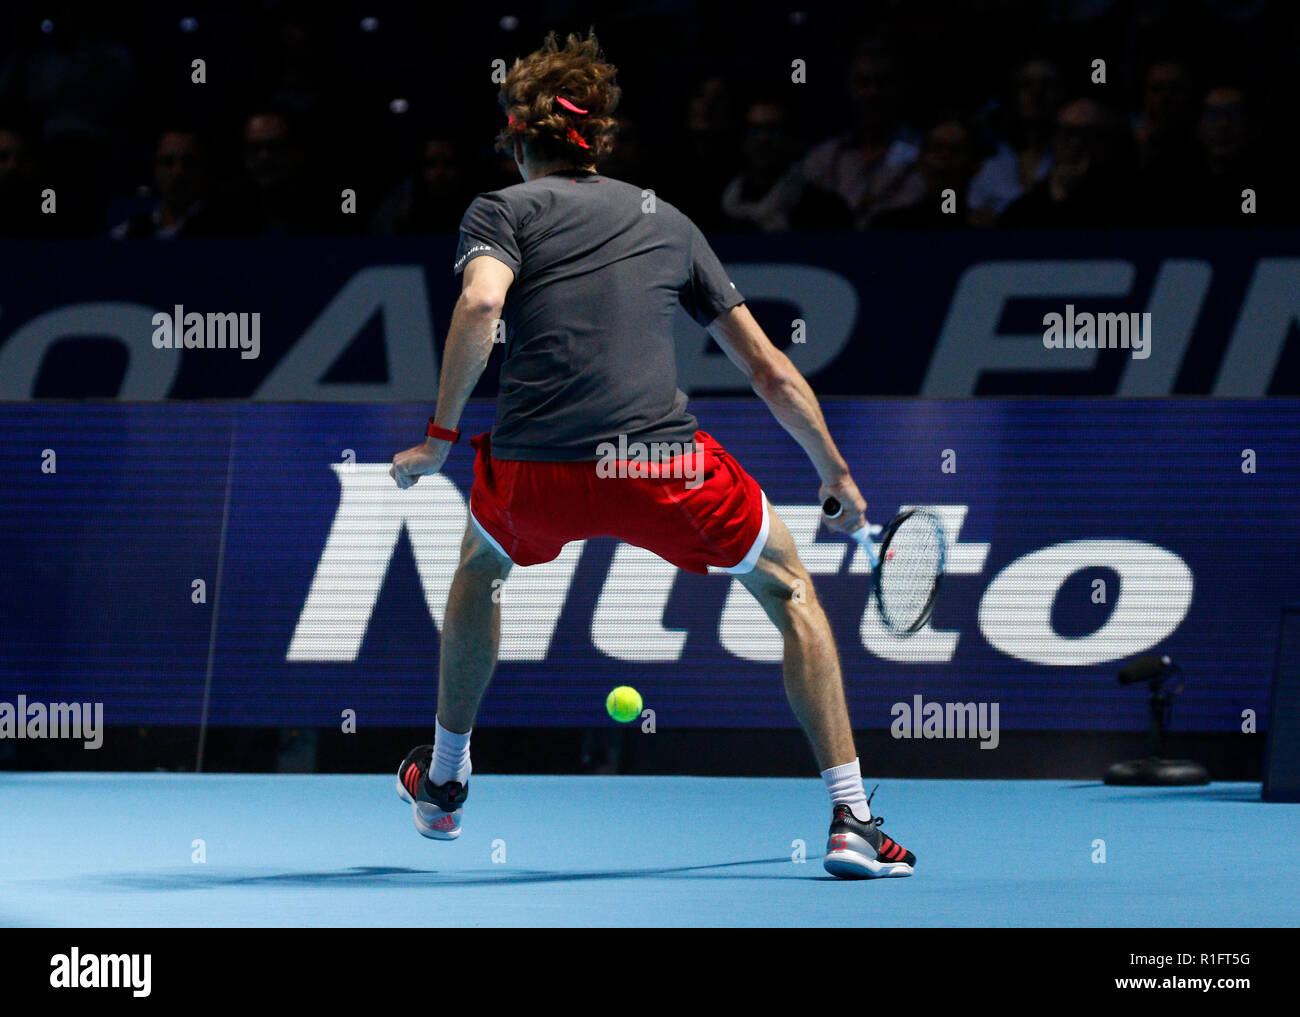 London, UK. 12th November, 2018. O2 Arena, London, England; Nitto ATP  Tennis Finals; Alexander Zverev (GER) plays a tweener shot between his legs  in his match against Marin Cilic (CRO) Credit: Action